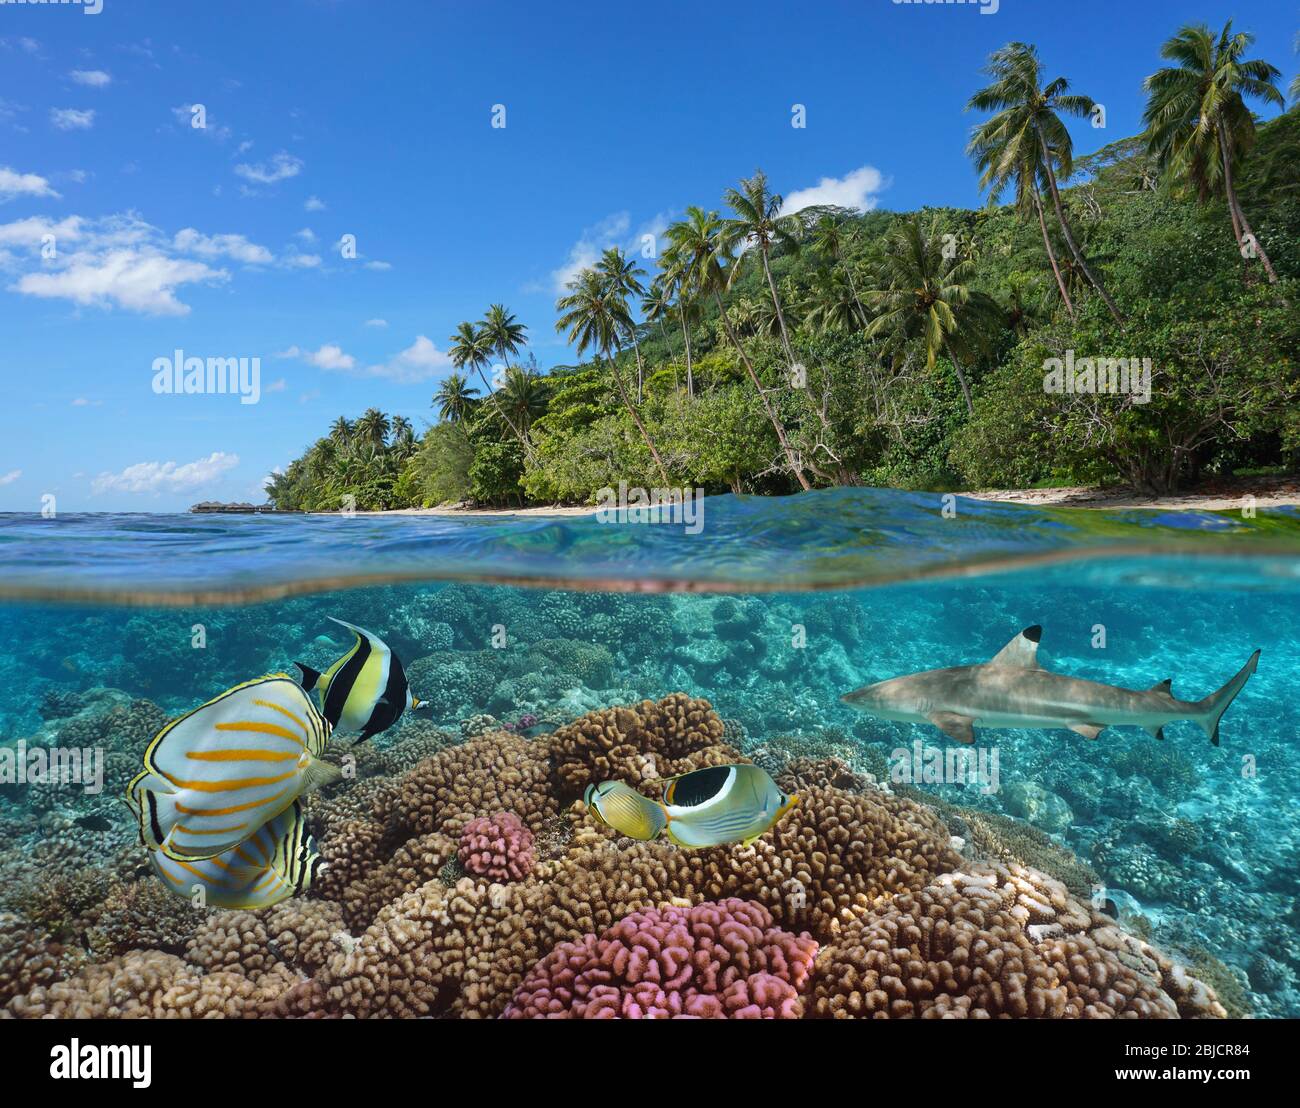 French Polynesia, coral reef with colorful fish underwater and tropical coast with green vegetation, split view over under water, Pacific ocean Stock Photo